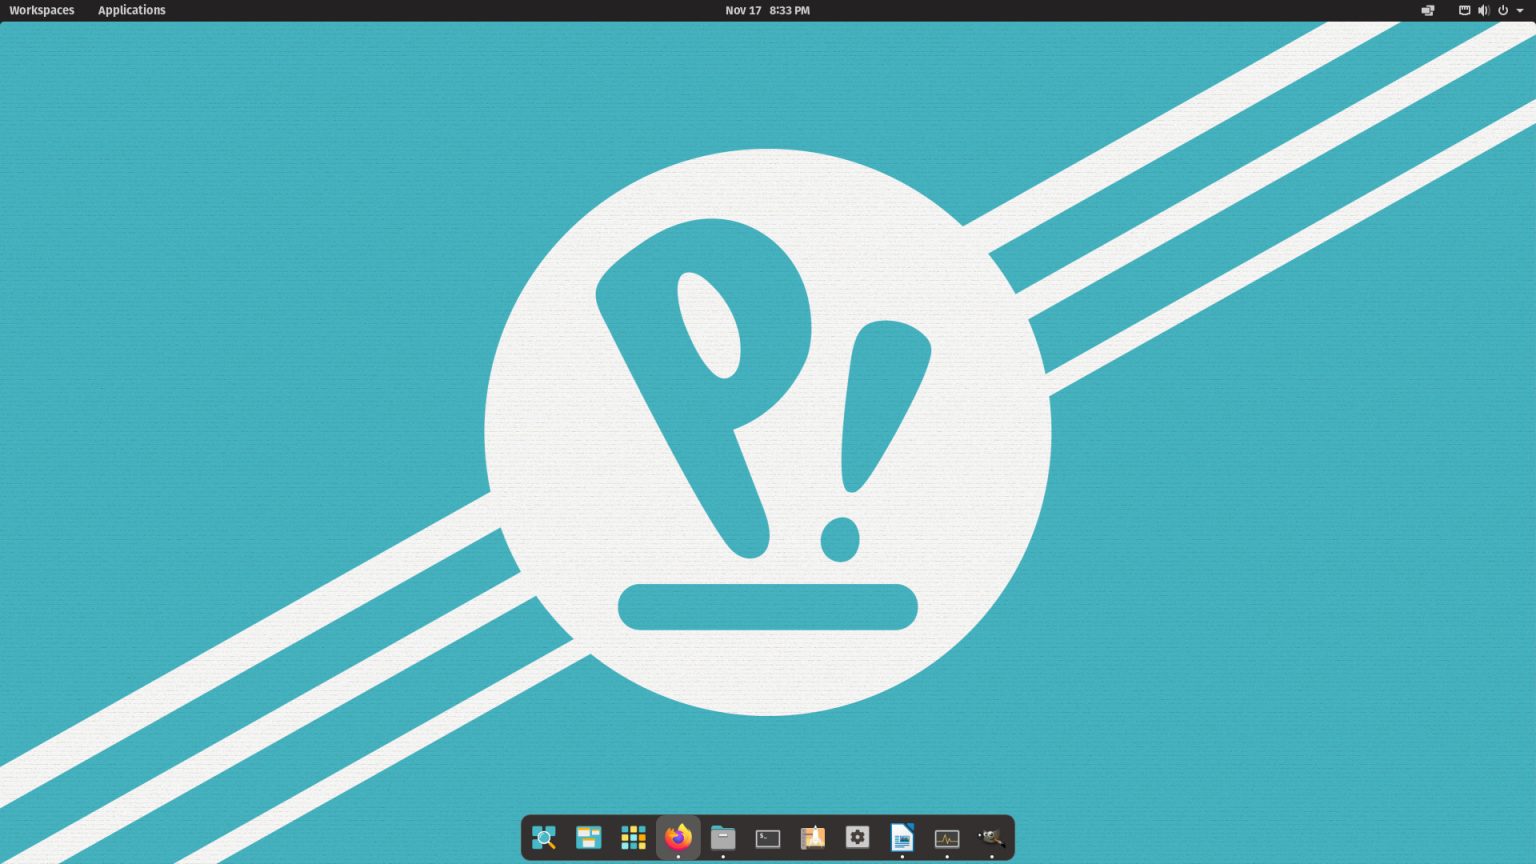 Superpaper is an advanced wallpaper app for Windows and Linux with